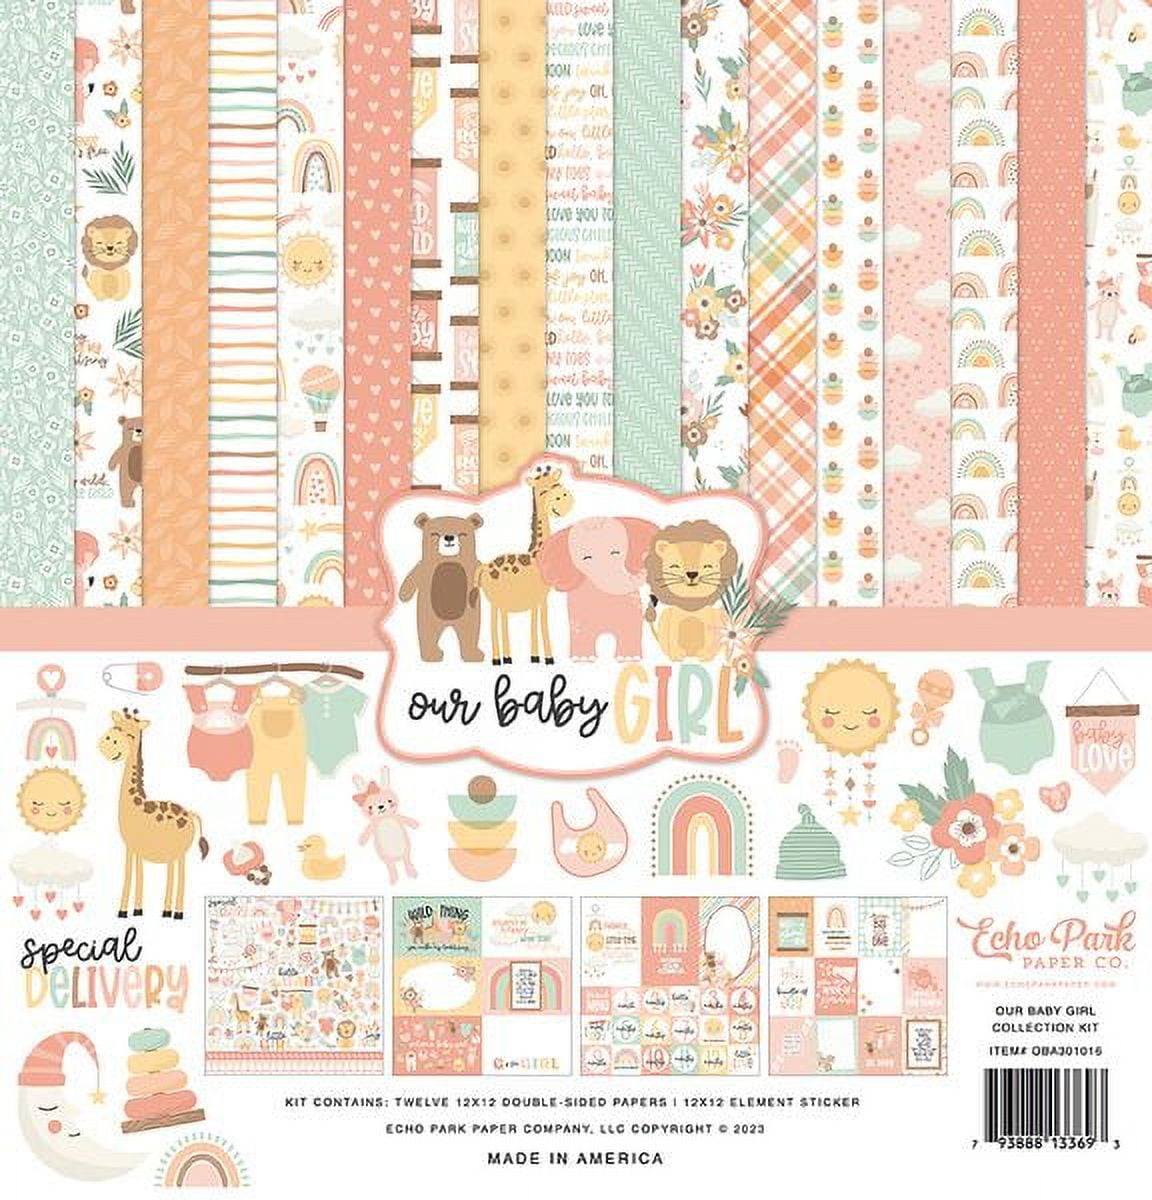 Wish Upon A Star Collection Kit - Echo Park Paper Co.